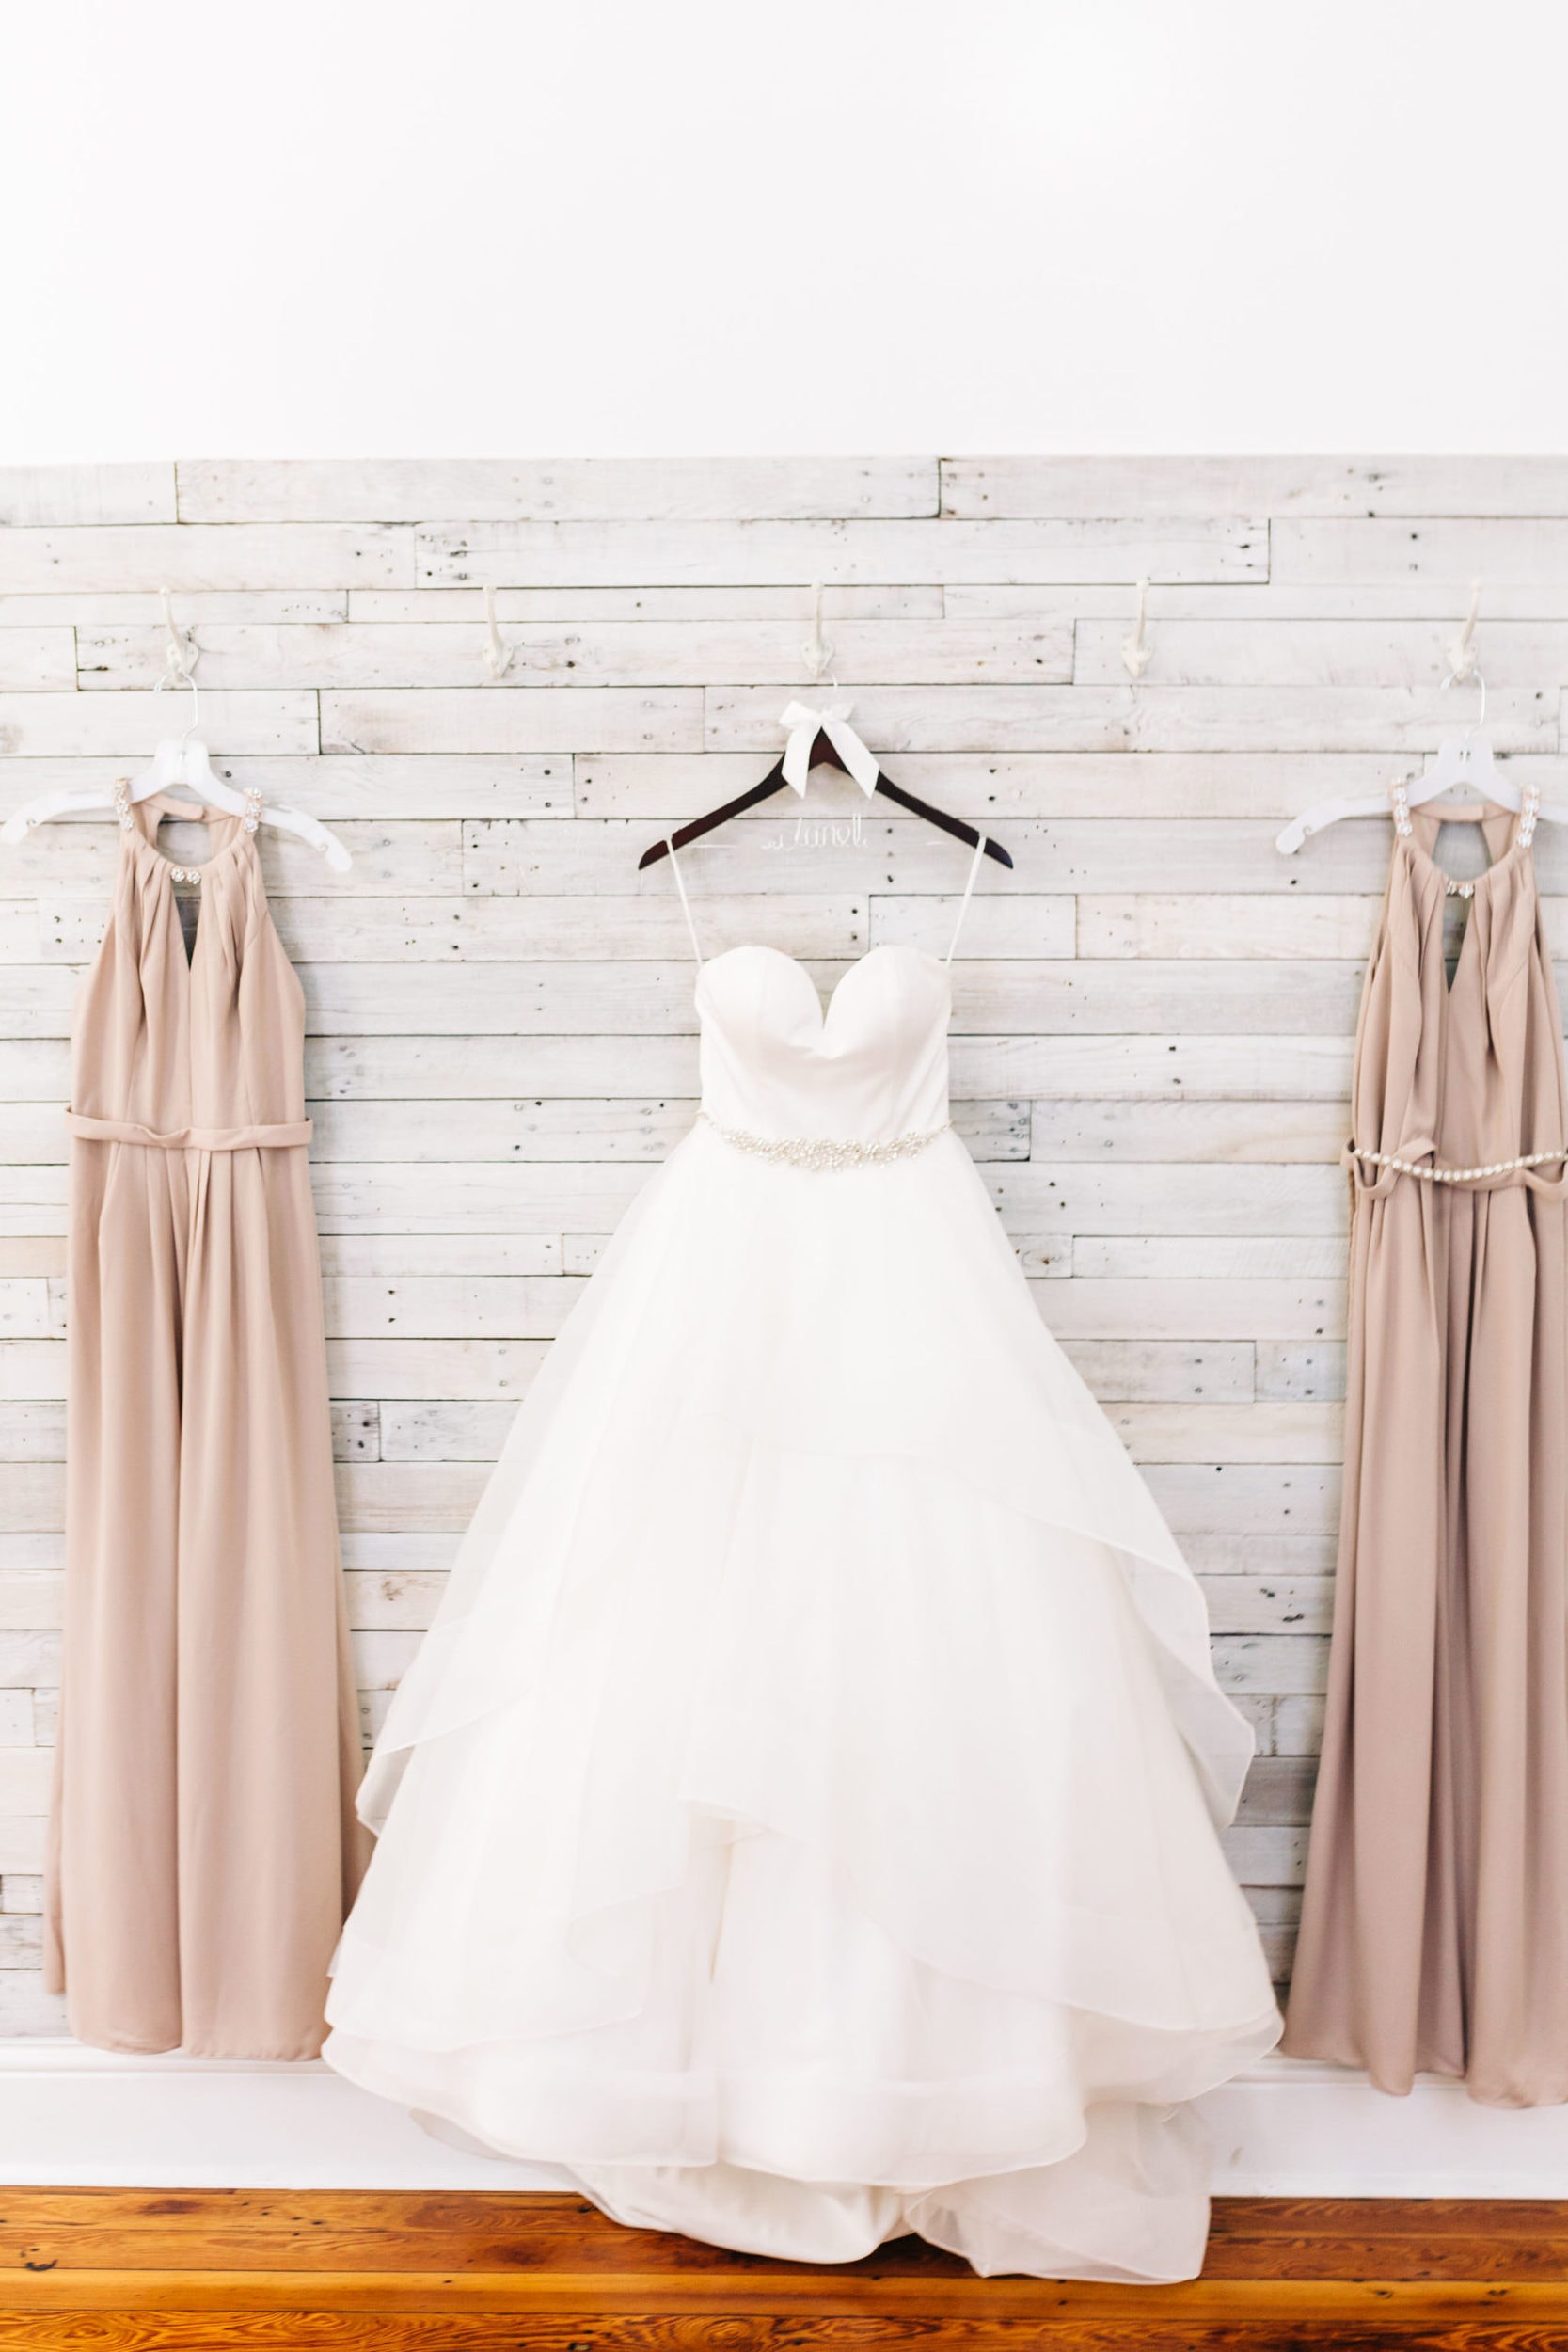 bridal gown hanging in bridal suite at venue 1902 with bridesmaid dresses hanging next to the gown